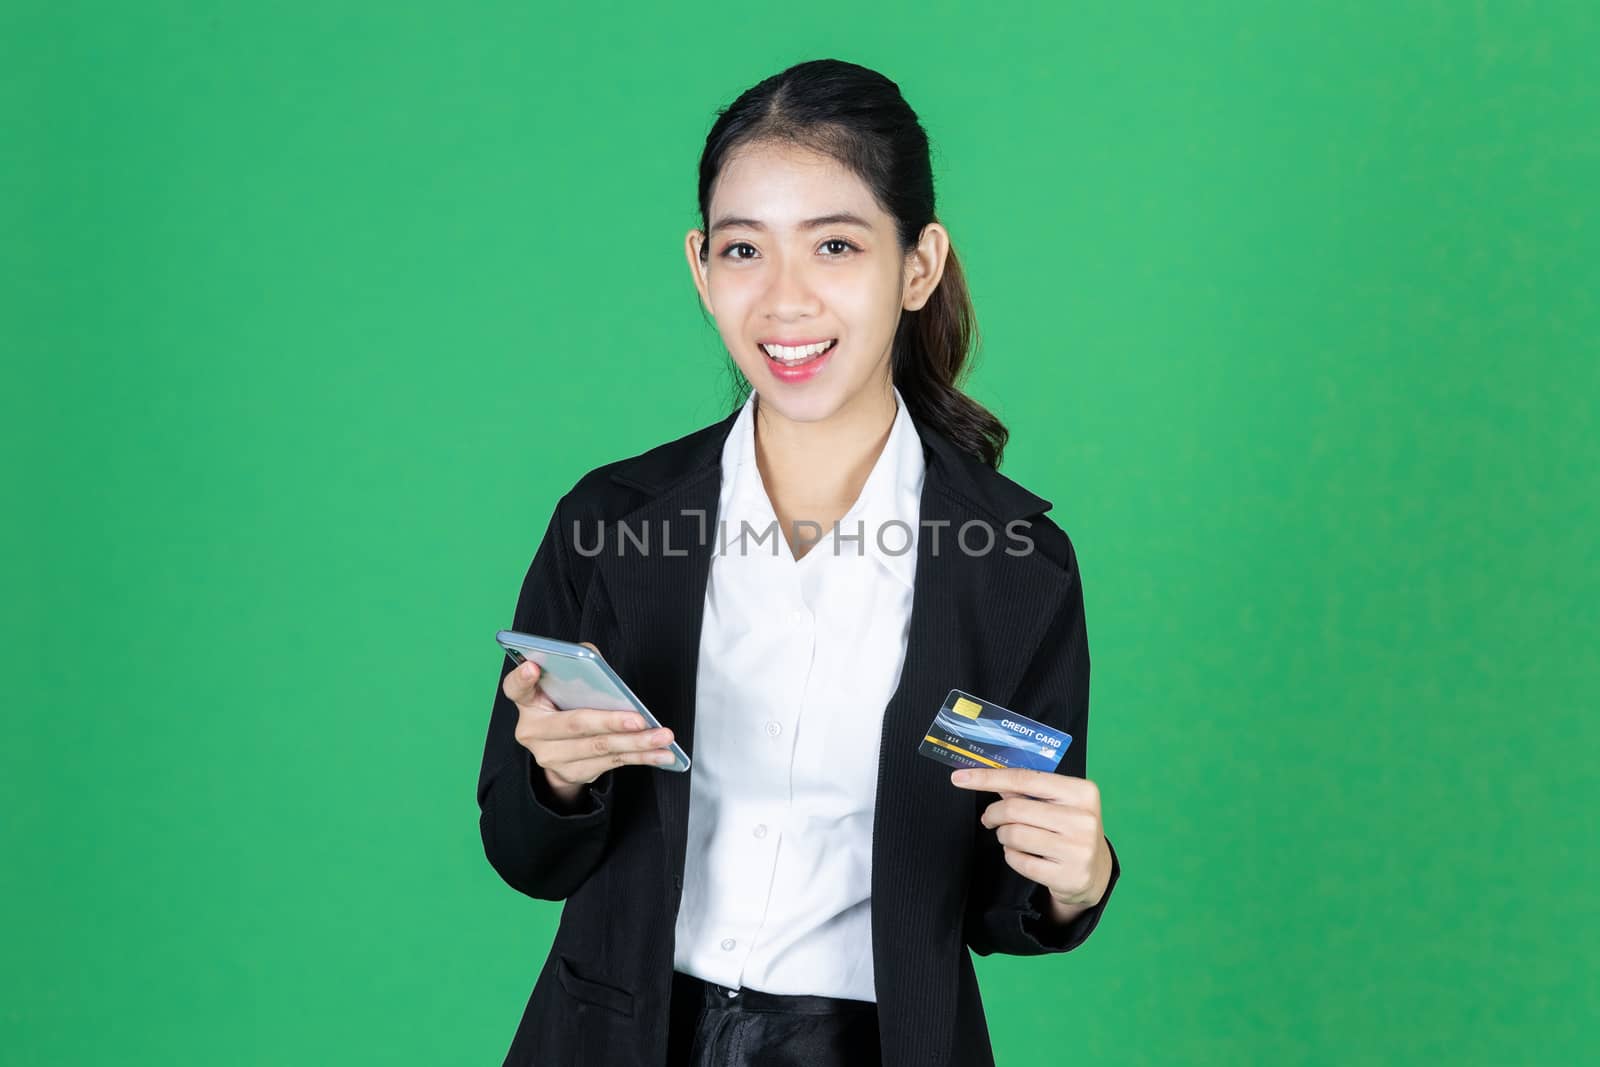 Portrait of cheerful young Asian business woman holding mobile smart phone and credit card on green isolated background. Internet of things concept.